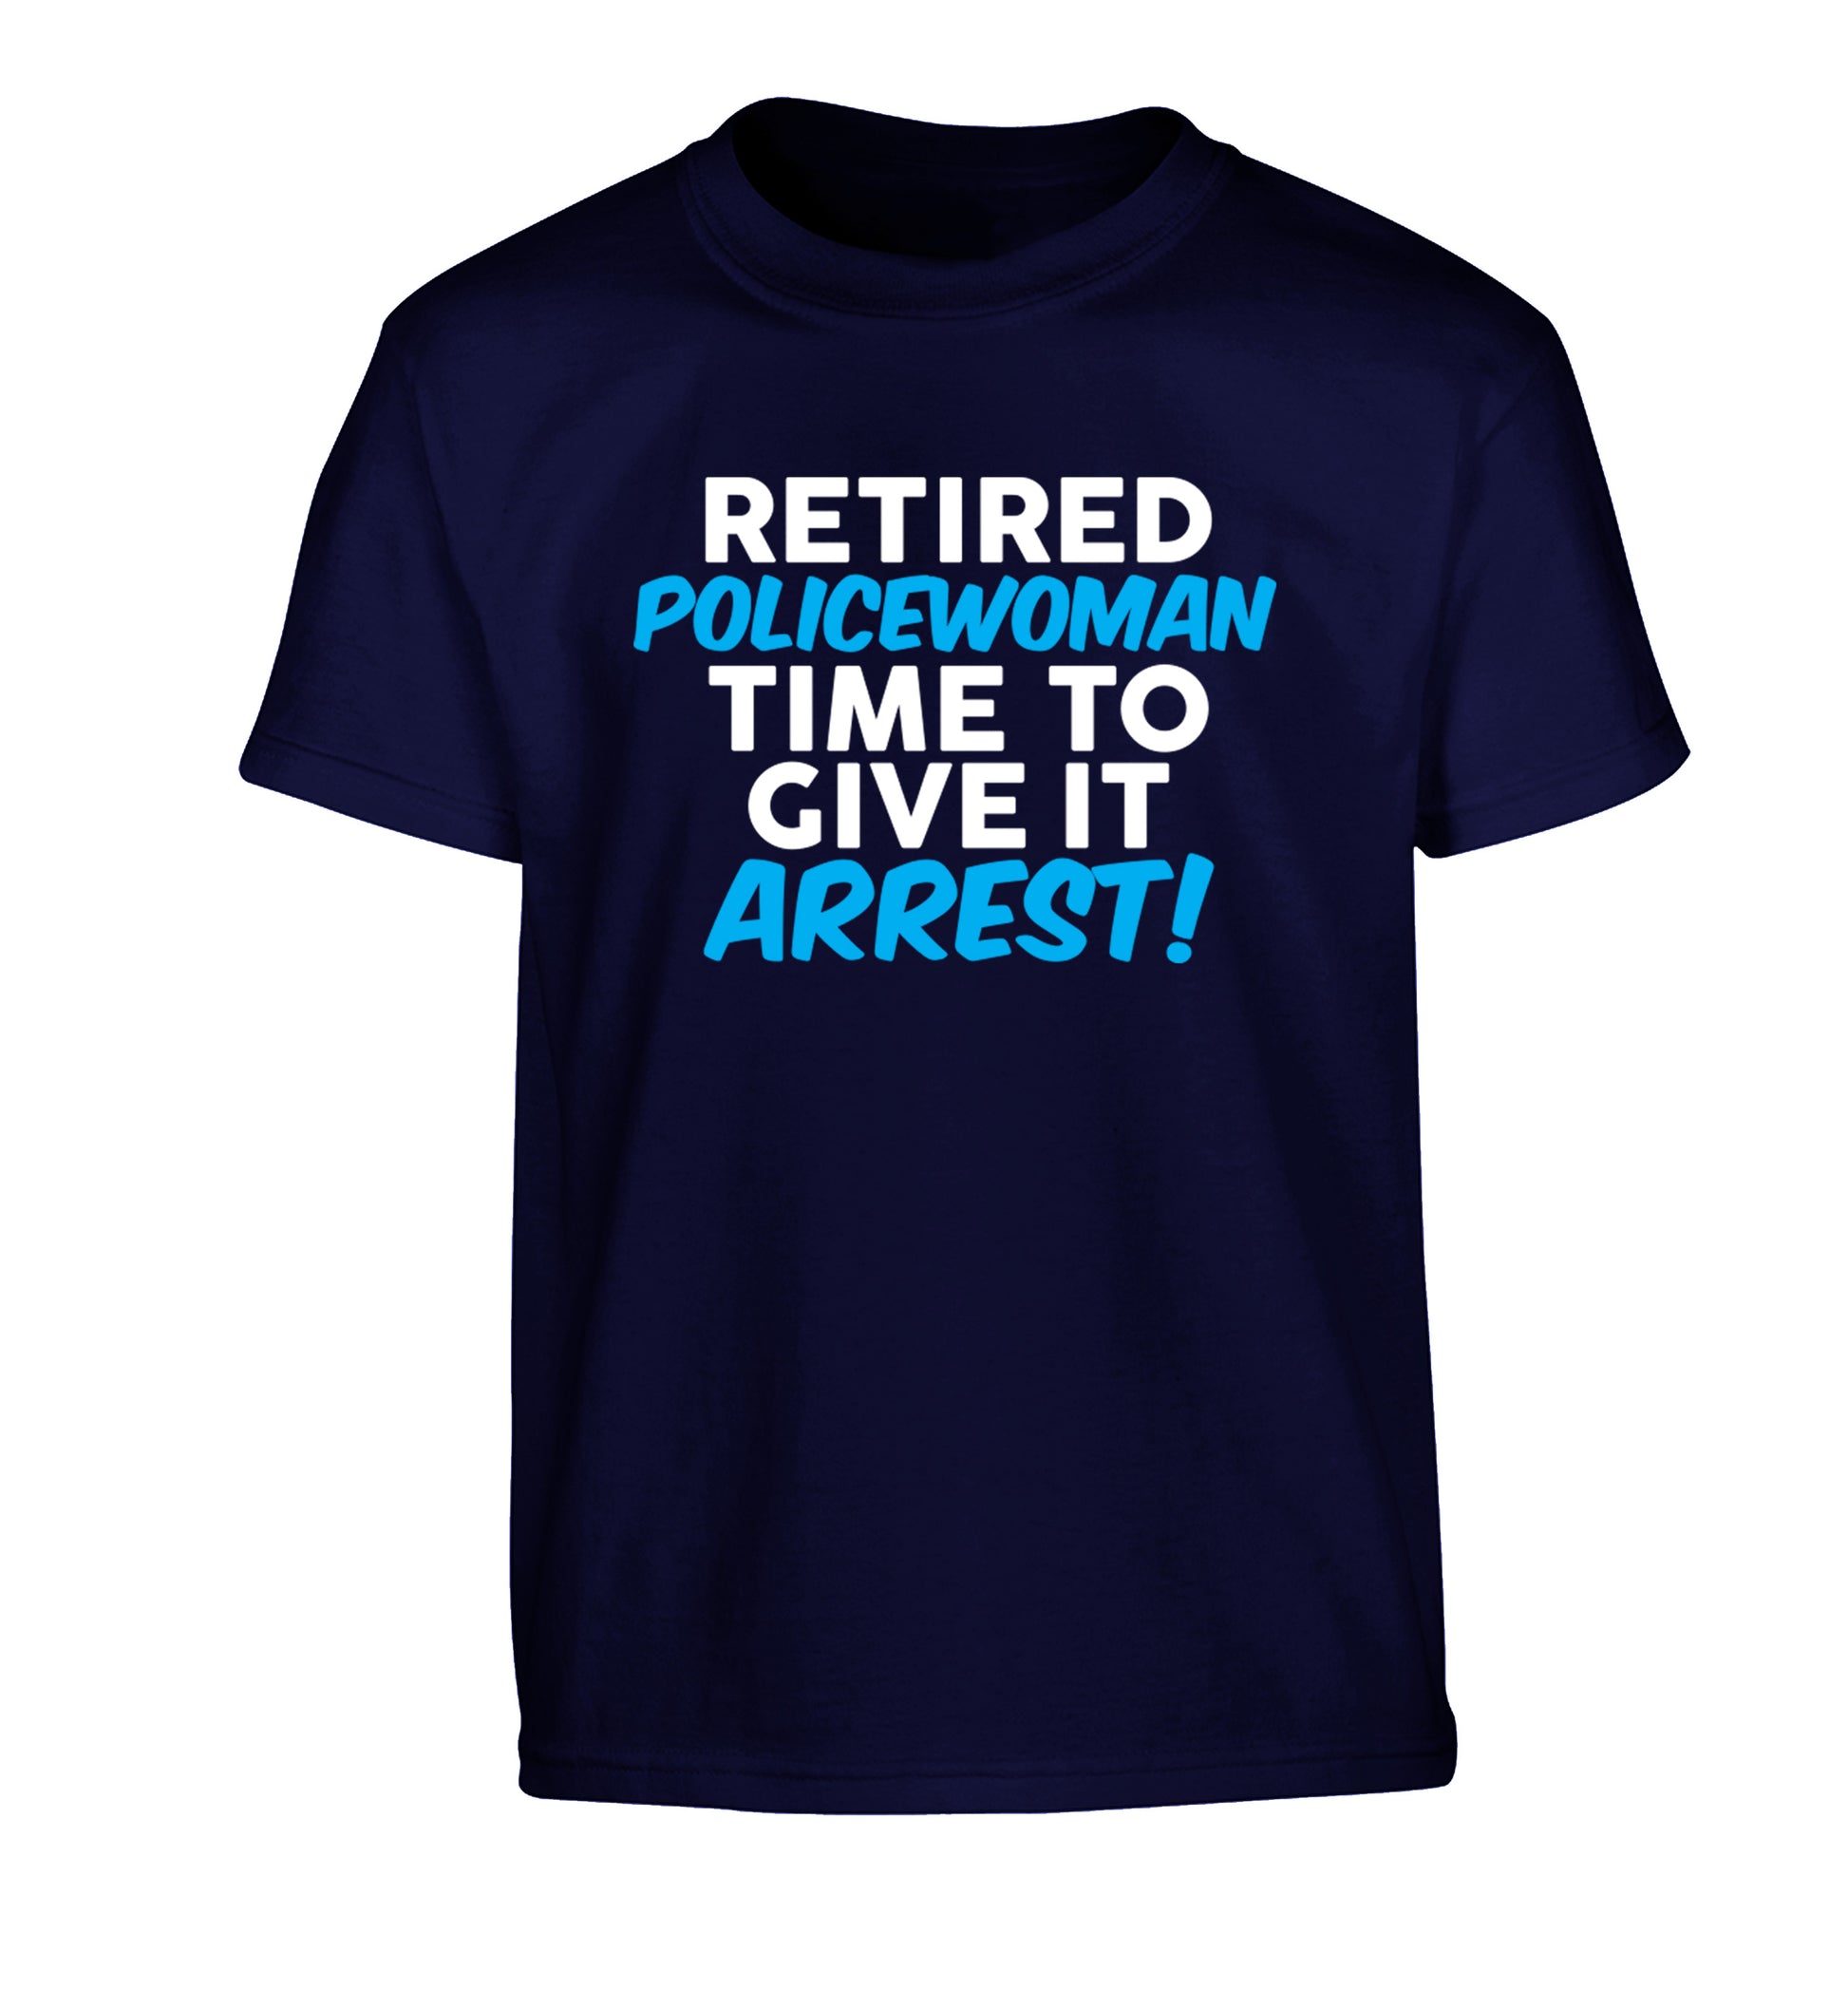 Retired policewoman time to give it arrest Children's navy Tshirt 12-13 Years